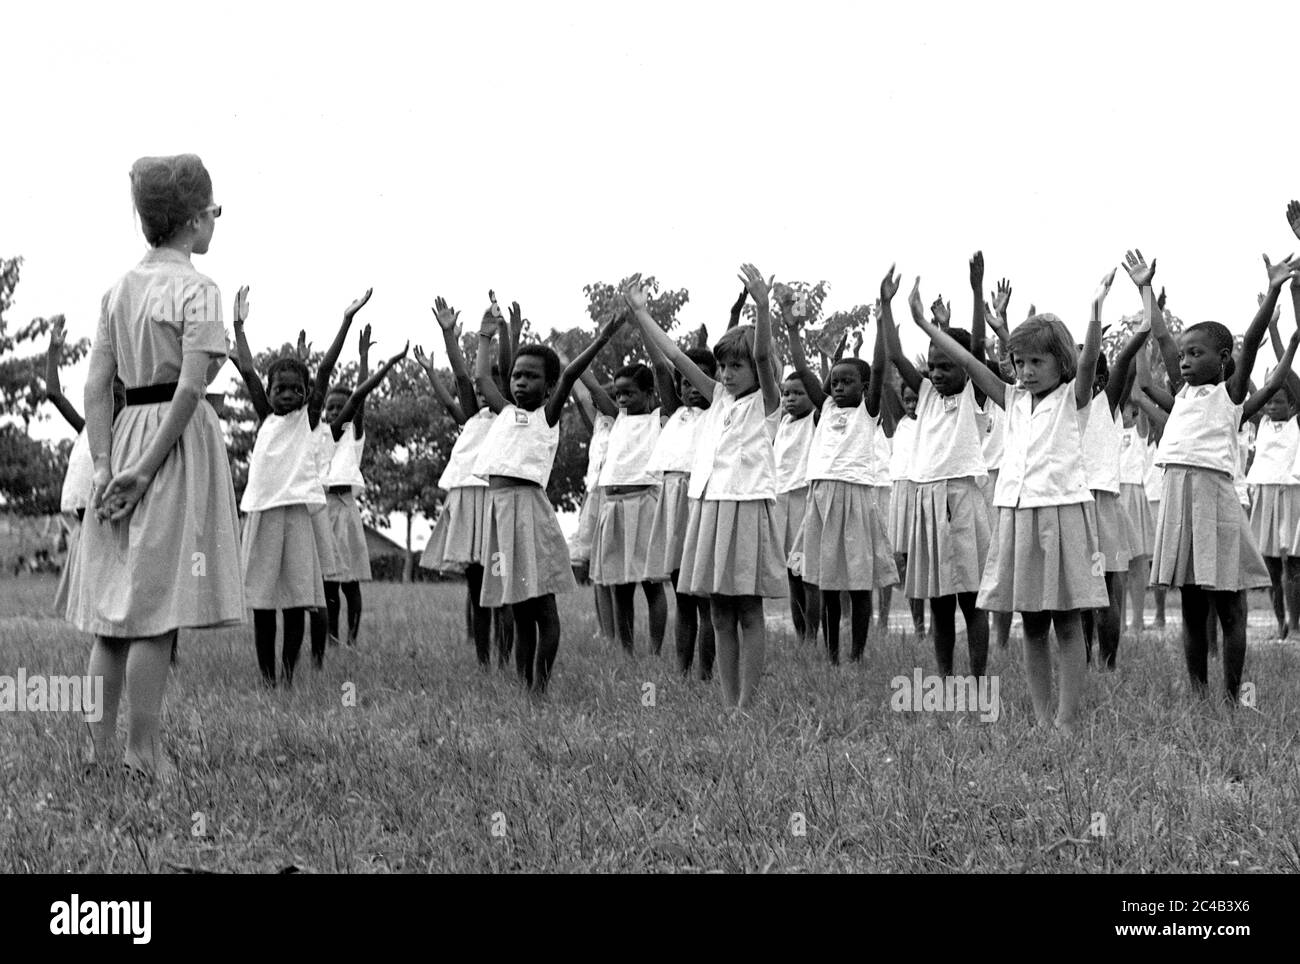 Children physical education class at school in Cote d'Ivoire or Ivory Coast 1963 Stock Photo